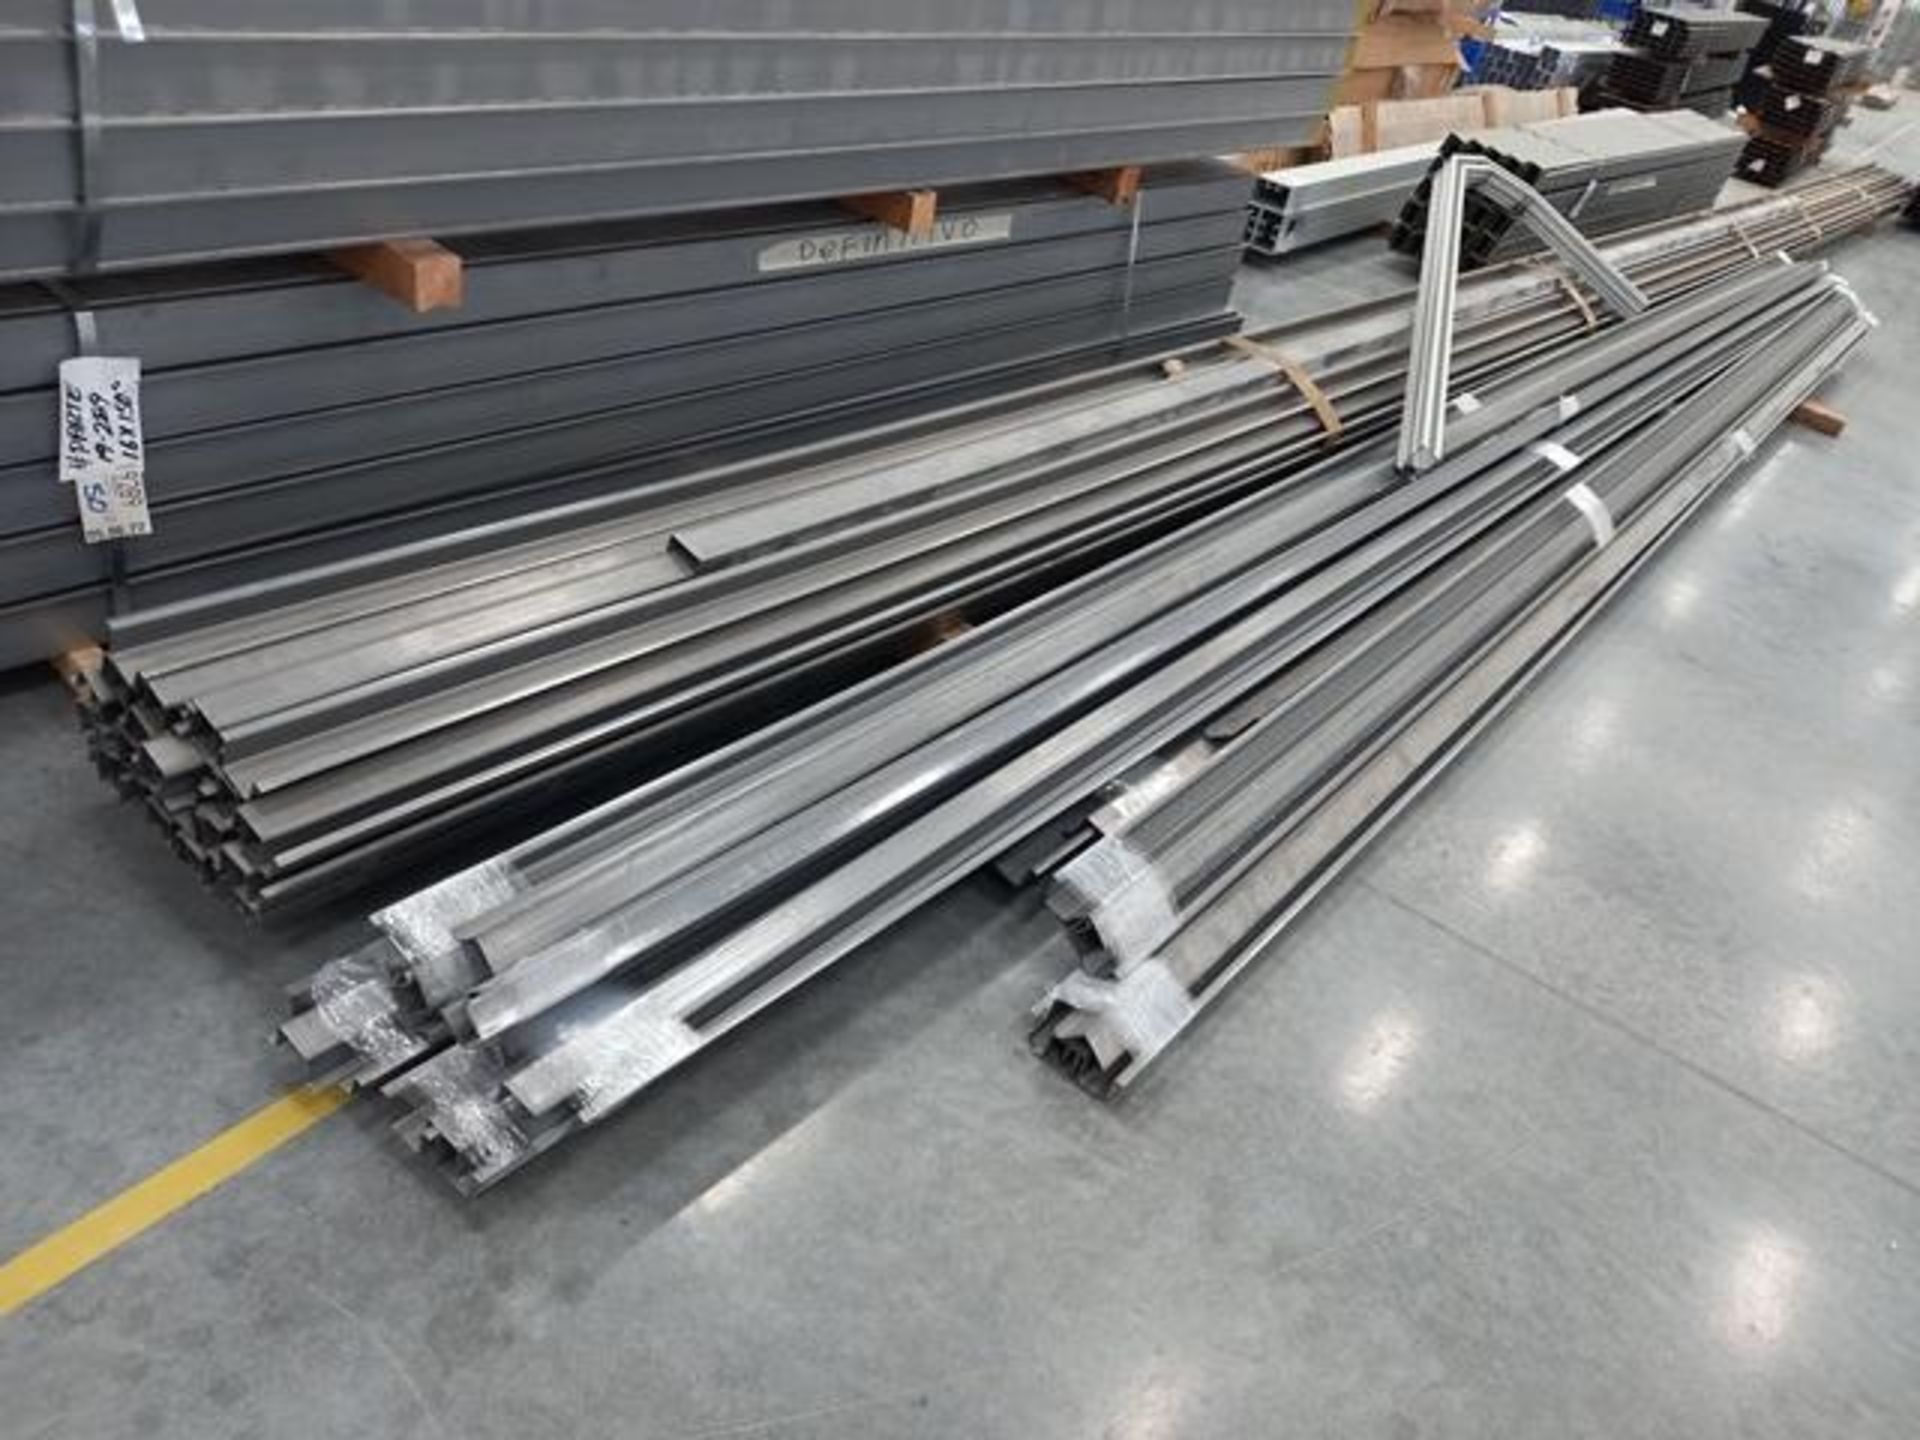 LOT: (30 approx.) Pallets, w/Aluminum Profile, Metal Canelta, Parts for Screens, Foam Boards, - Image 18 of 34